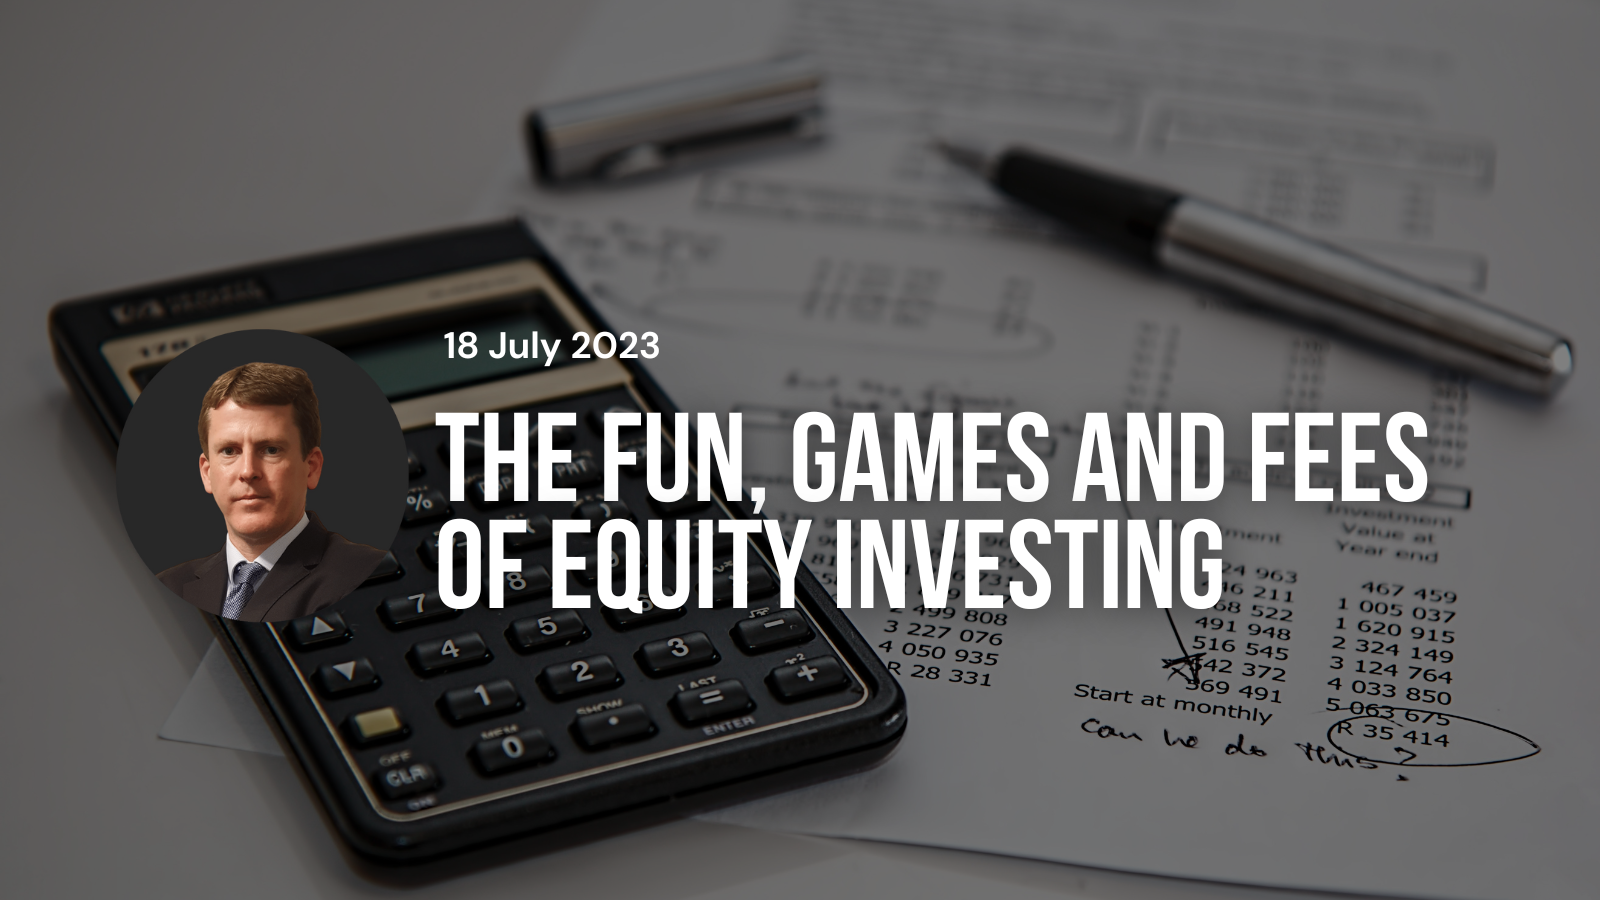 The fun, games and fees of equity investing